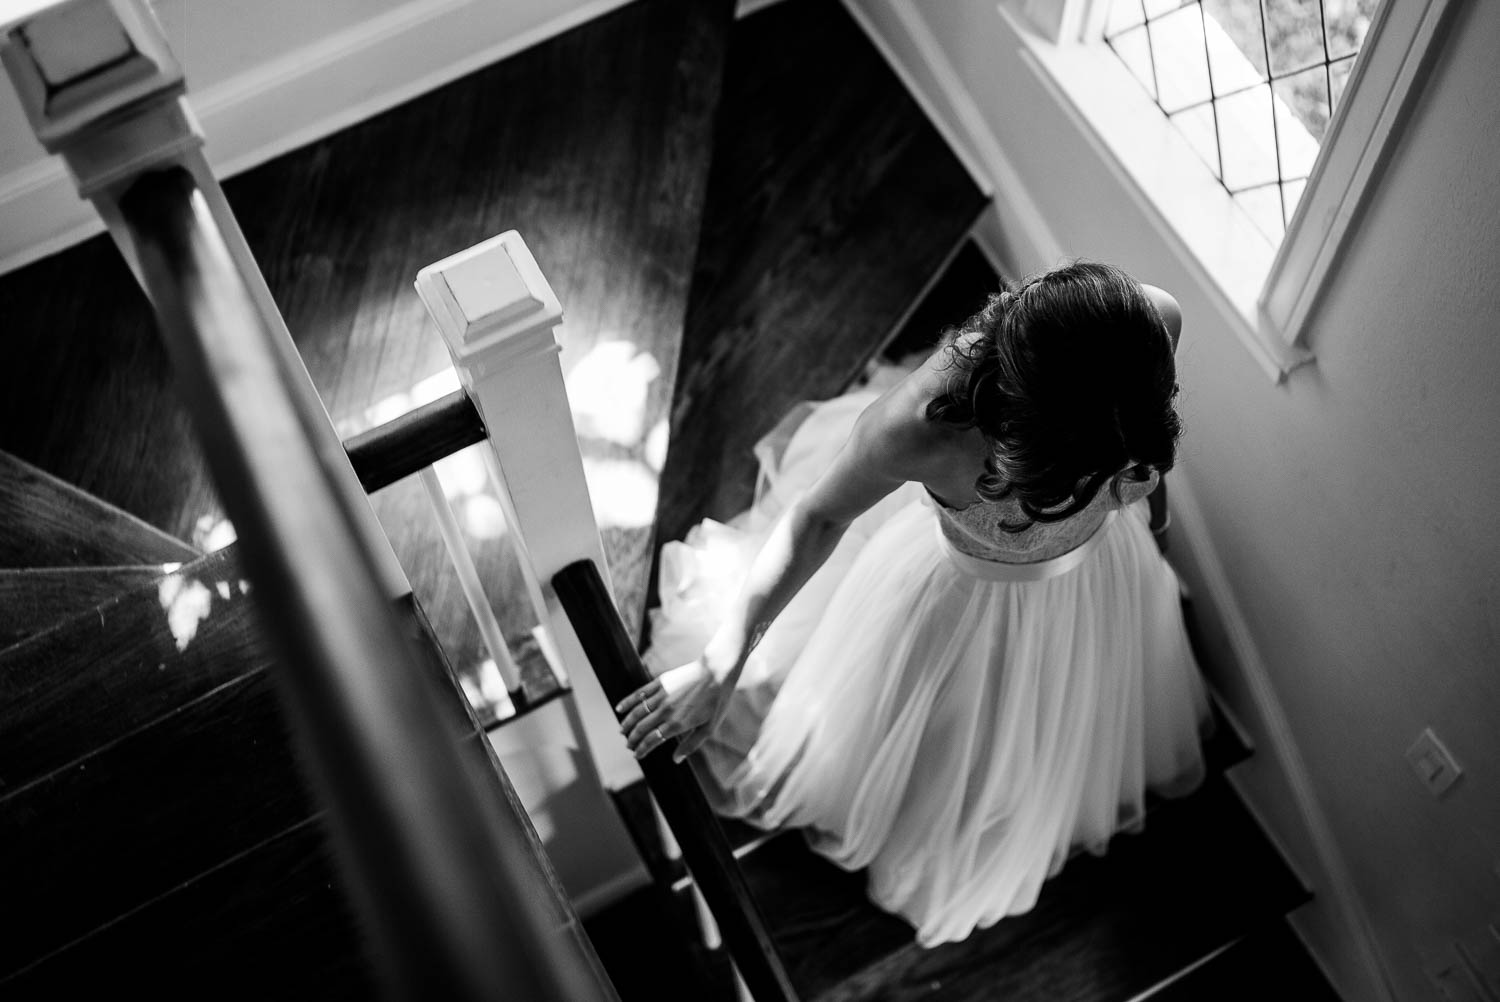 Jessica the bride descends her aunt's staircase-Leica photographer-Philip Thomas Photography